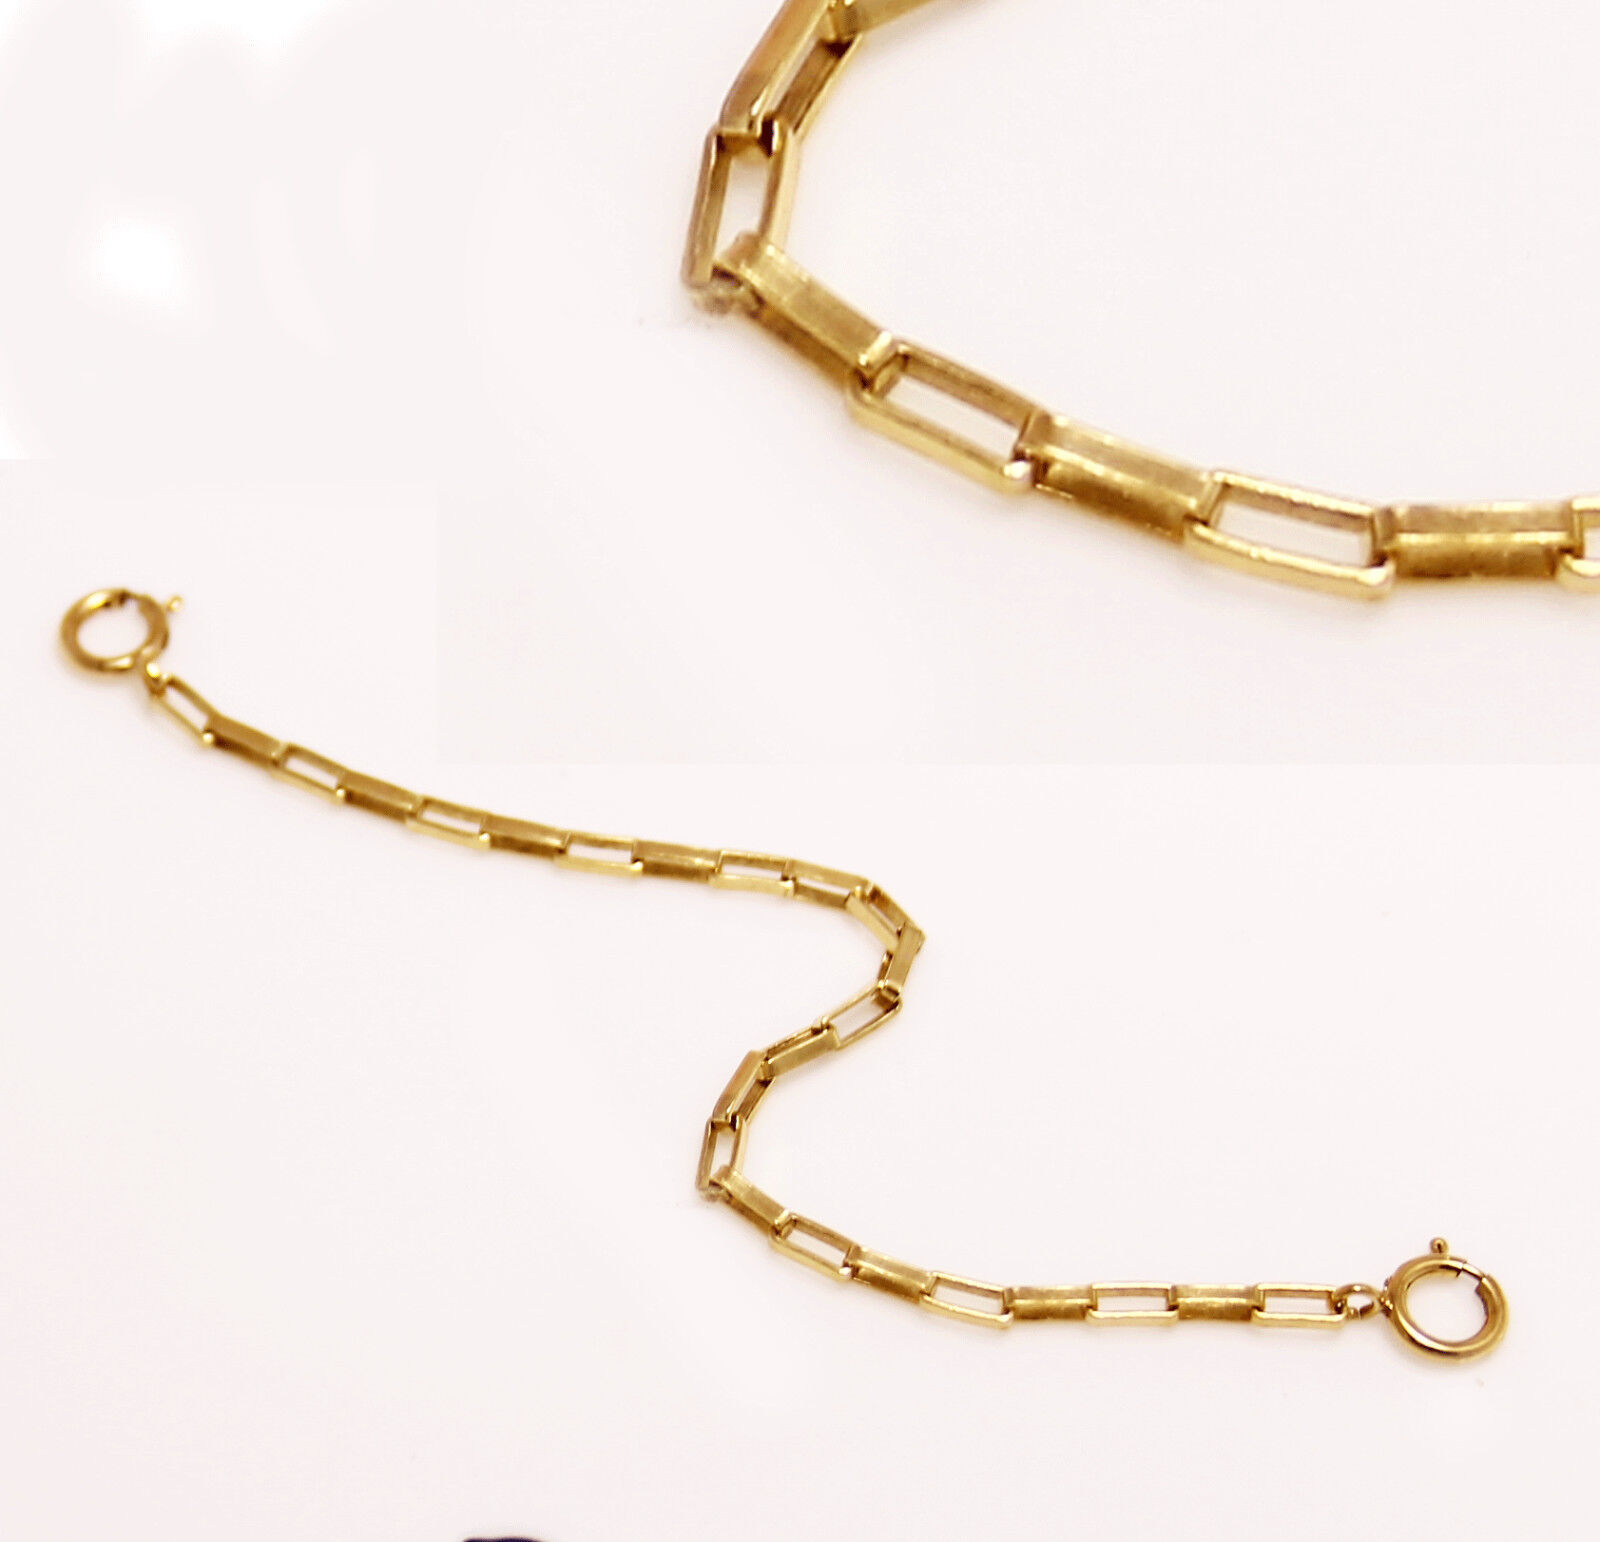 Primary image for 14k gold filled box Extender Safety Chain Necklace Bracelet  lock  1"  - 10"